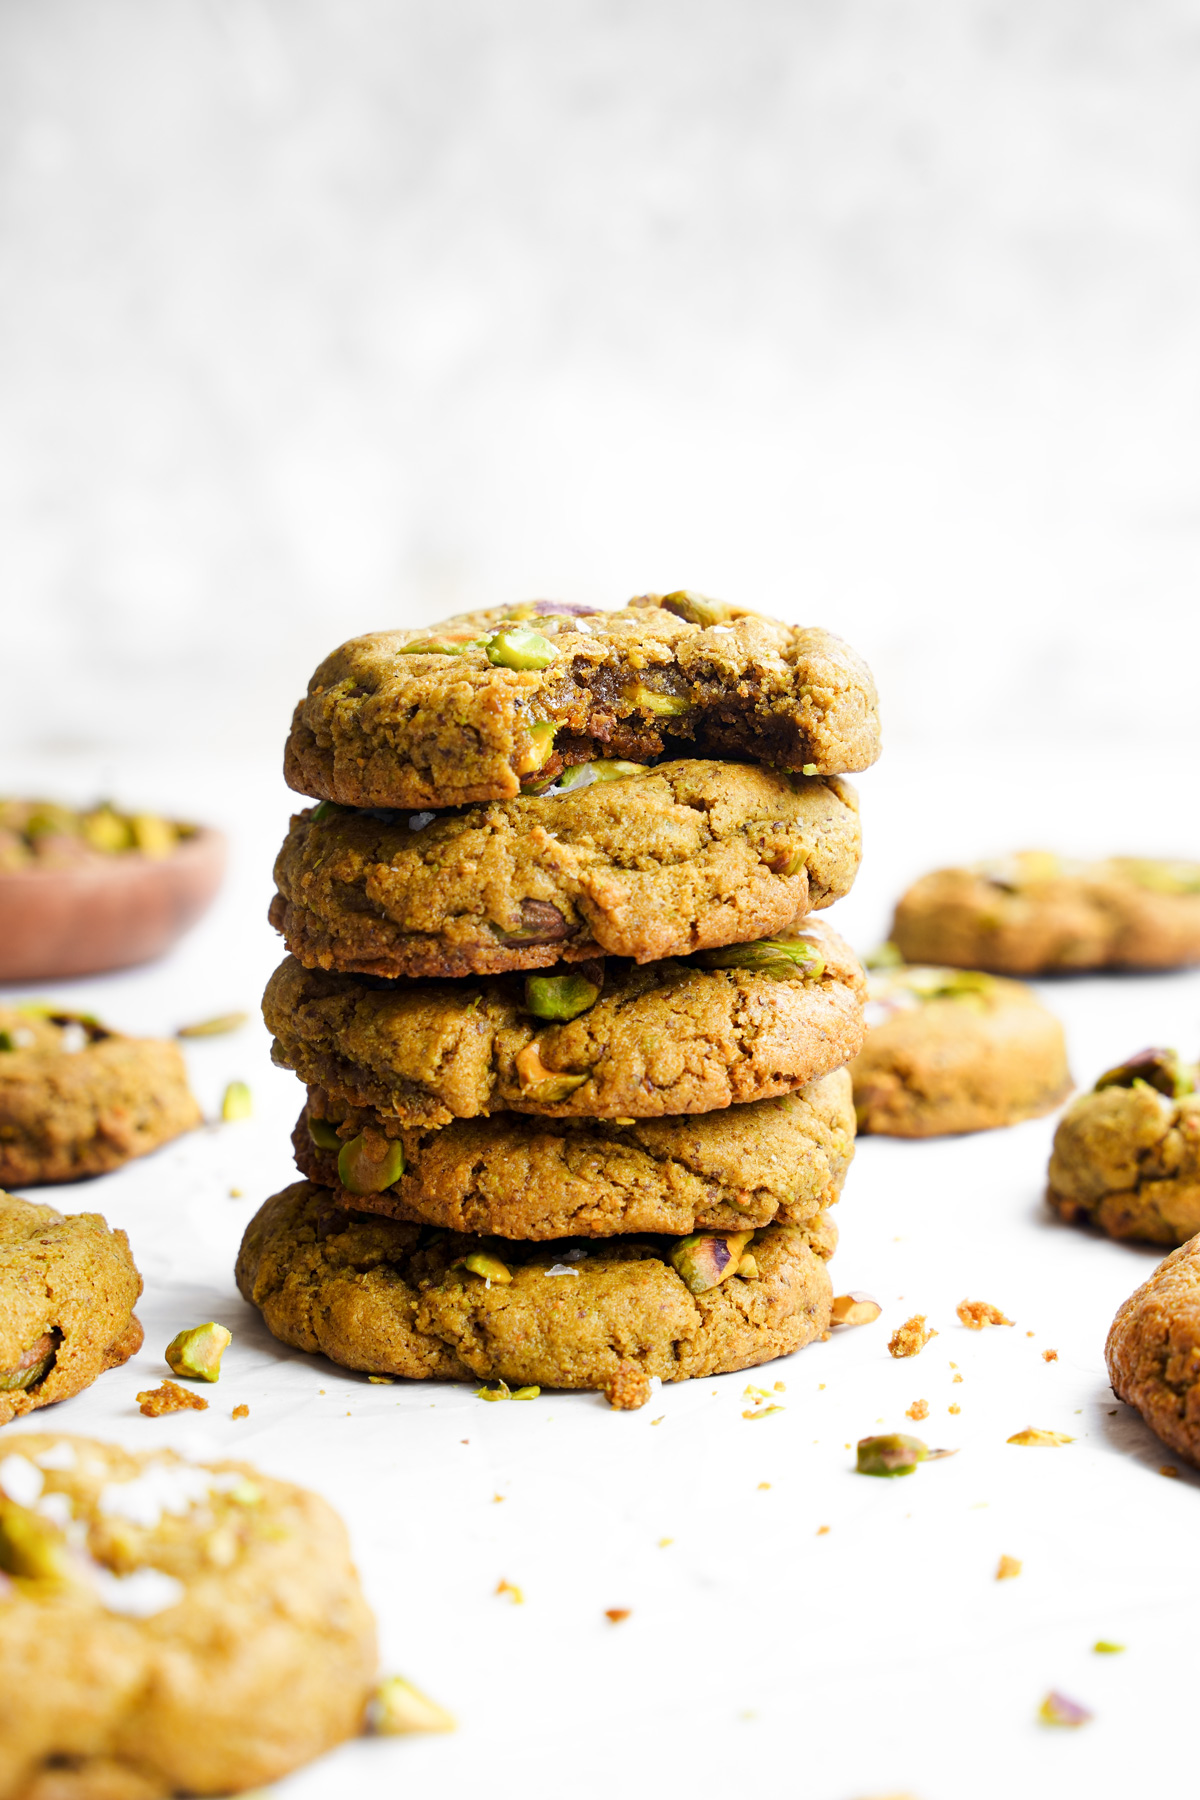 a close up of the vegan pistachio cookies with a bite taken out of the top one to show the soft and chewy texture